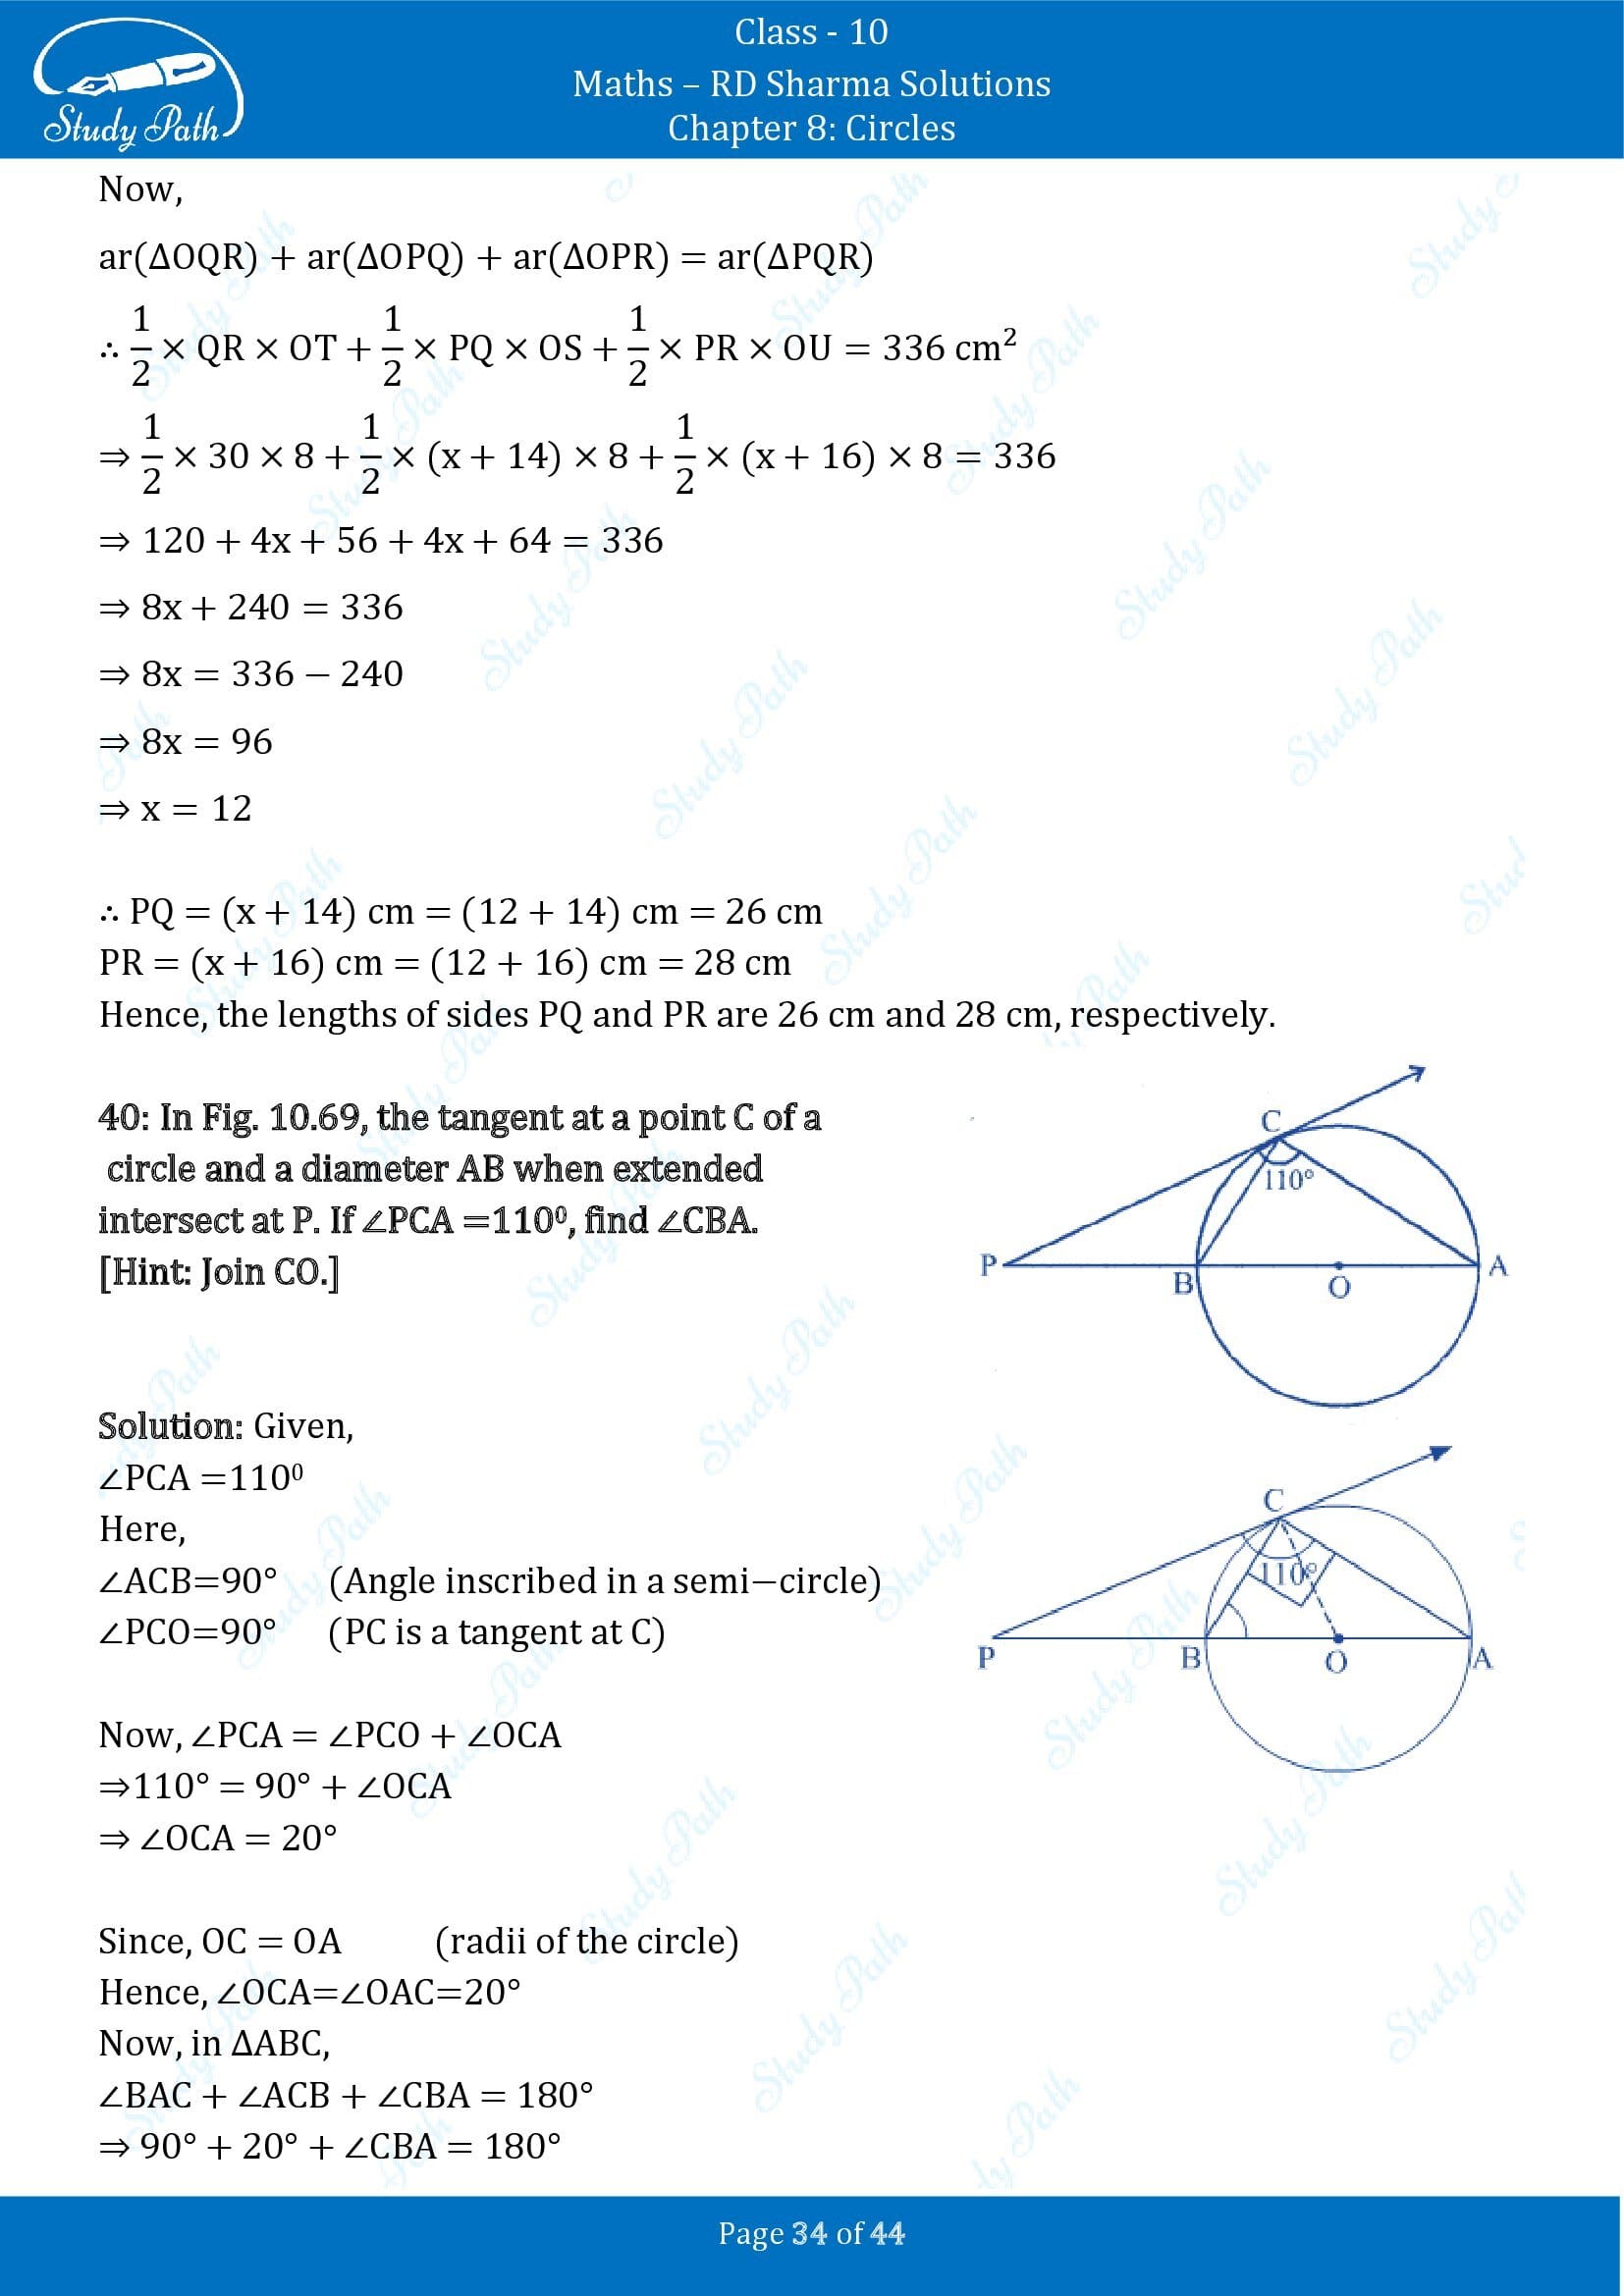 RD Sharma Solutions Class 10 Chapter 8 Circles Exercise 8.2 00034